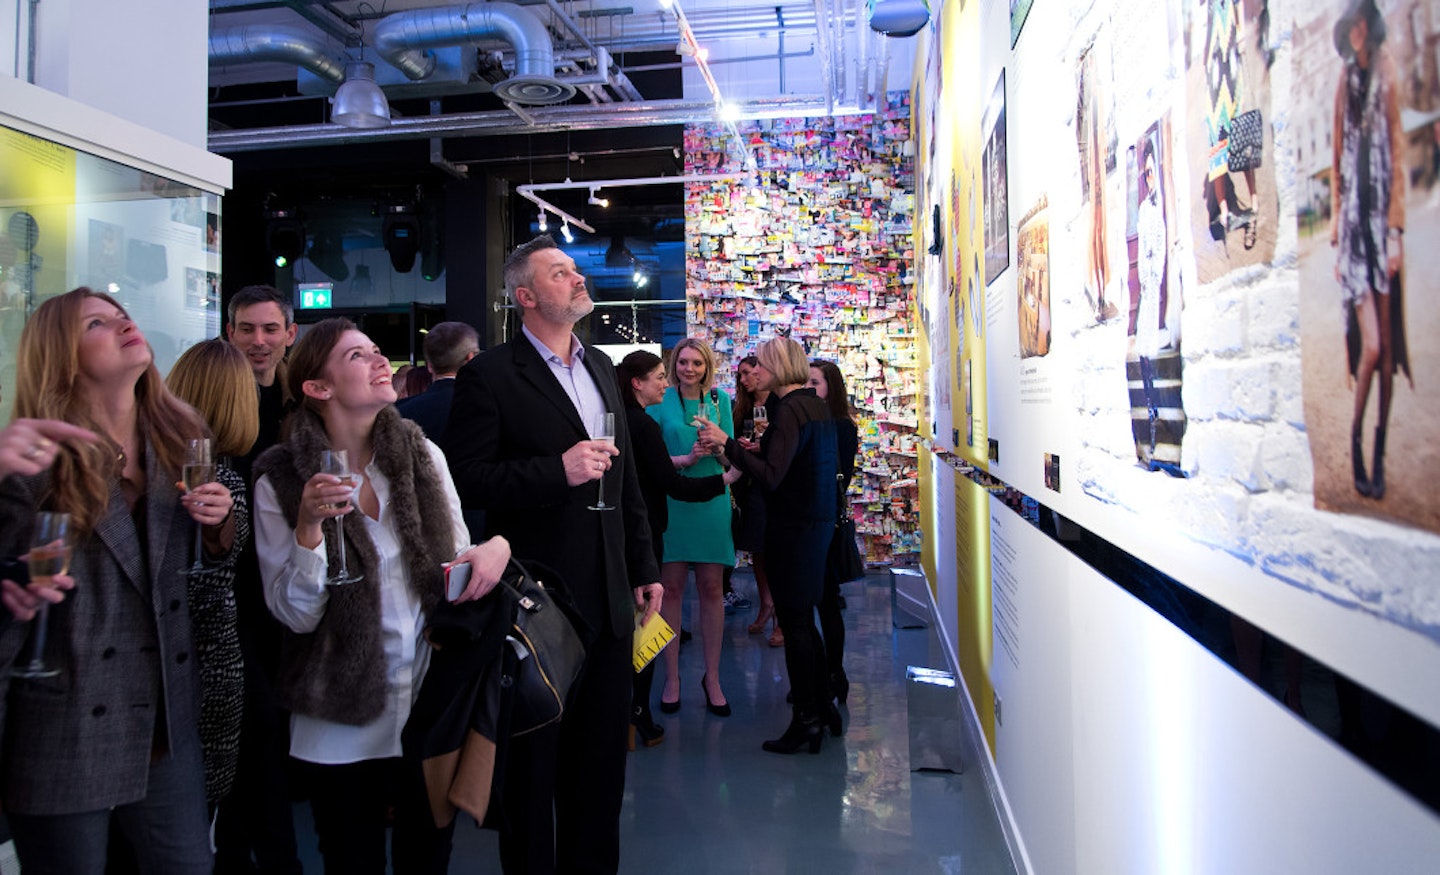 Inside the preview of the #Grazia10 exhibition